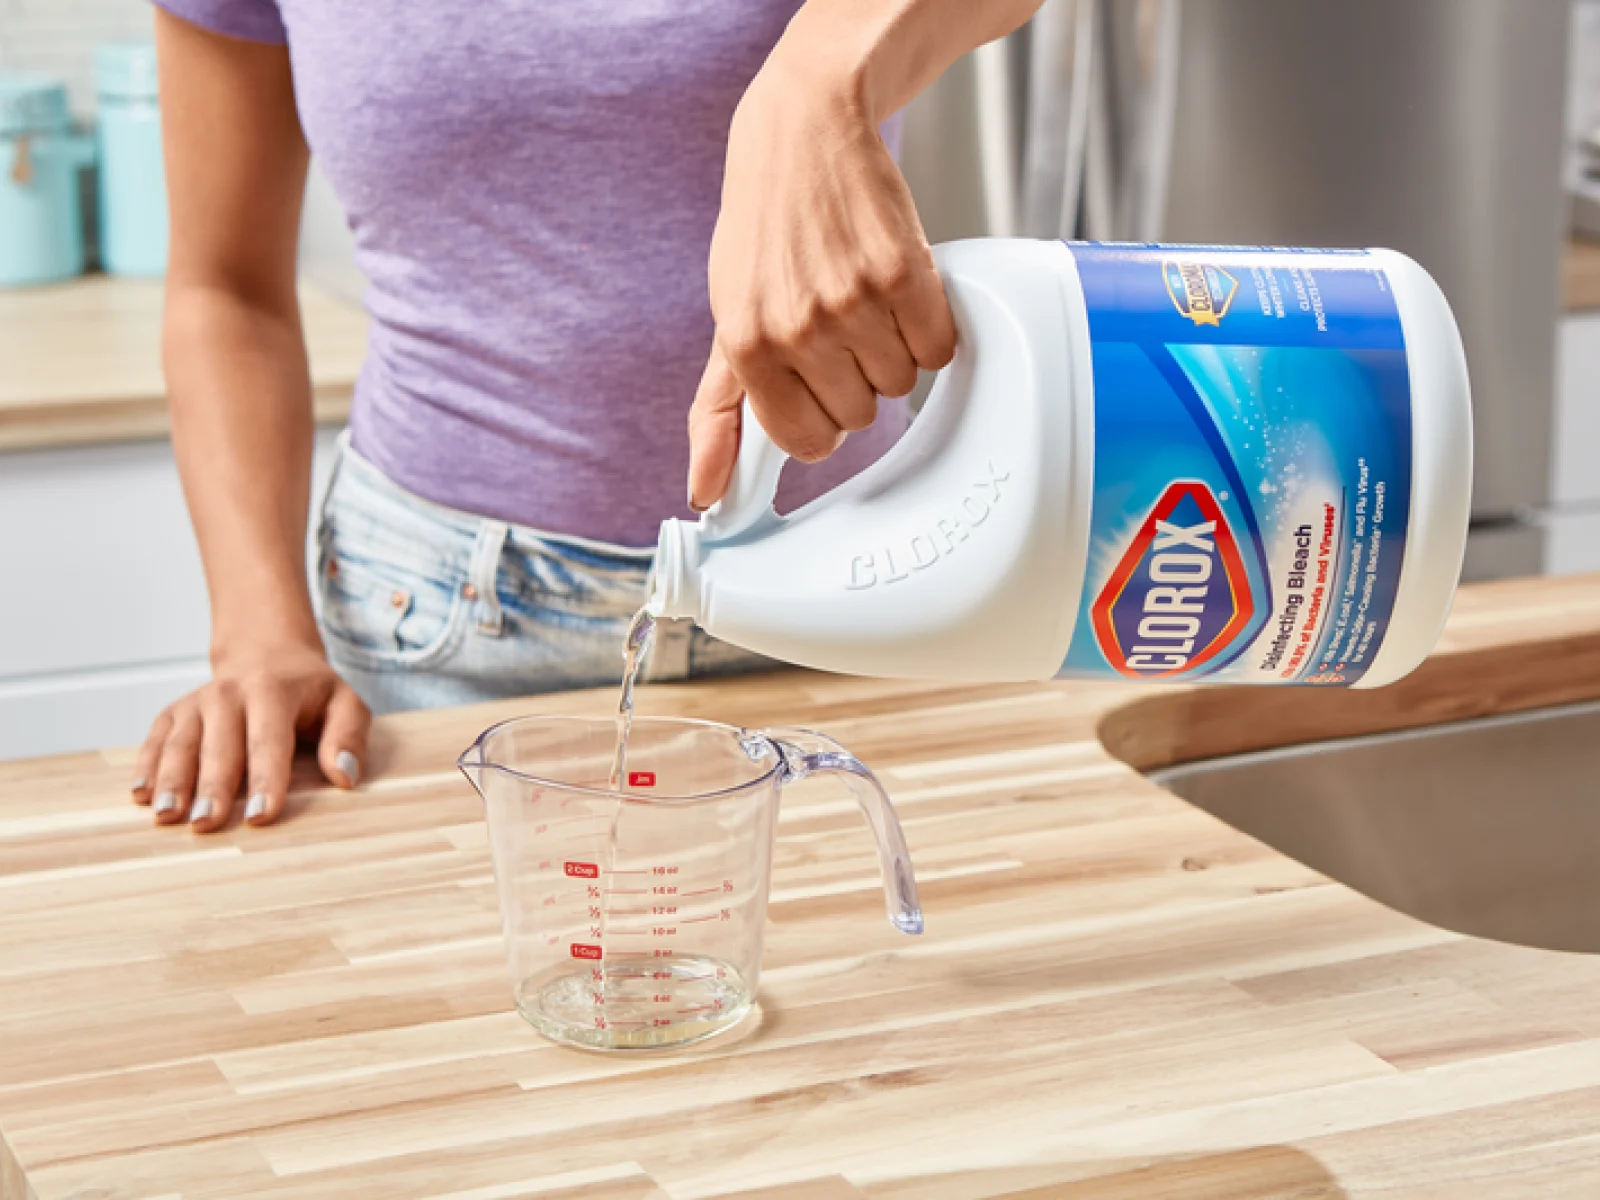 woman pouring Clorox bleach into a measuring cup on a wood countertop